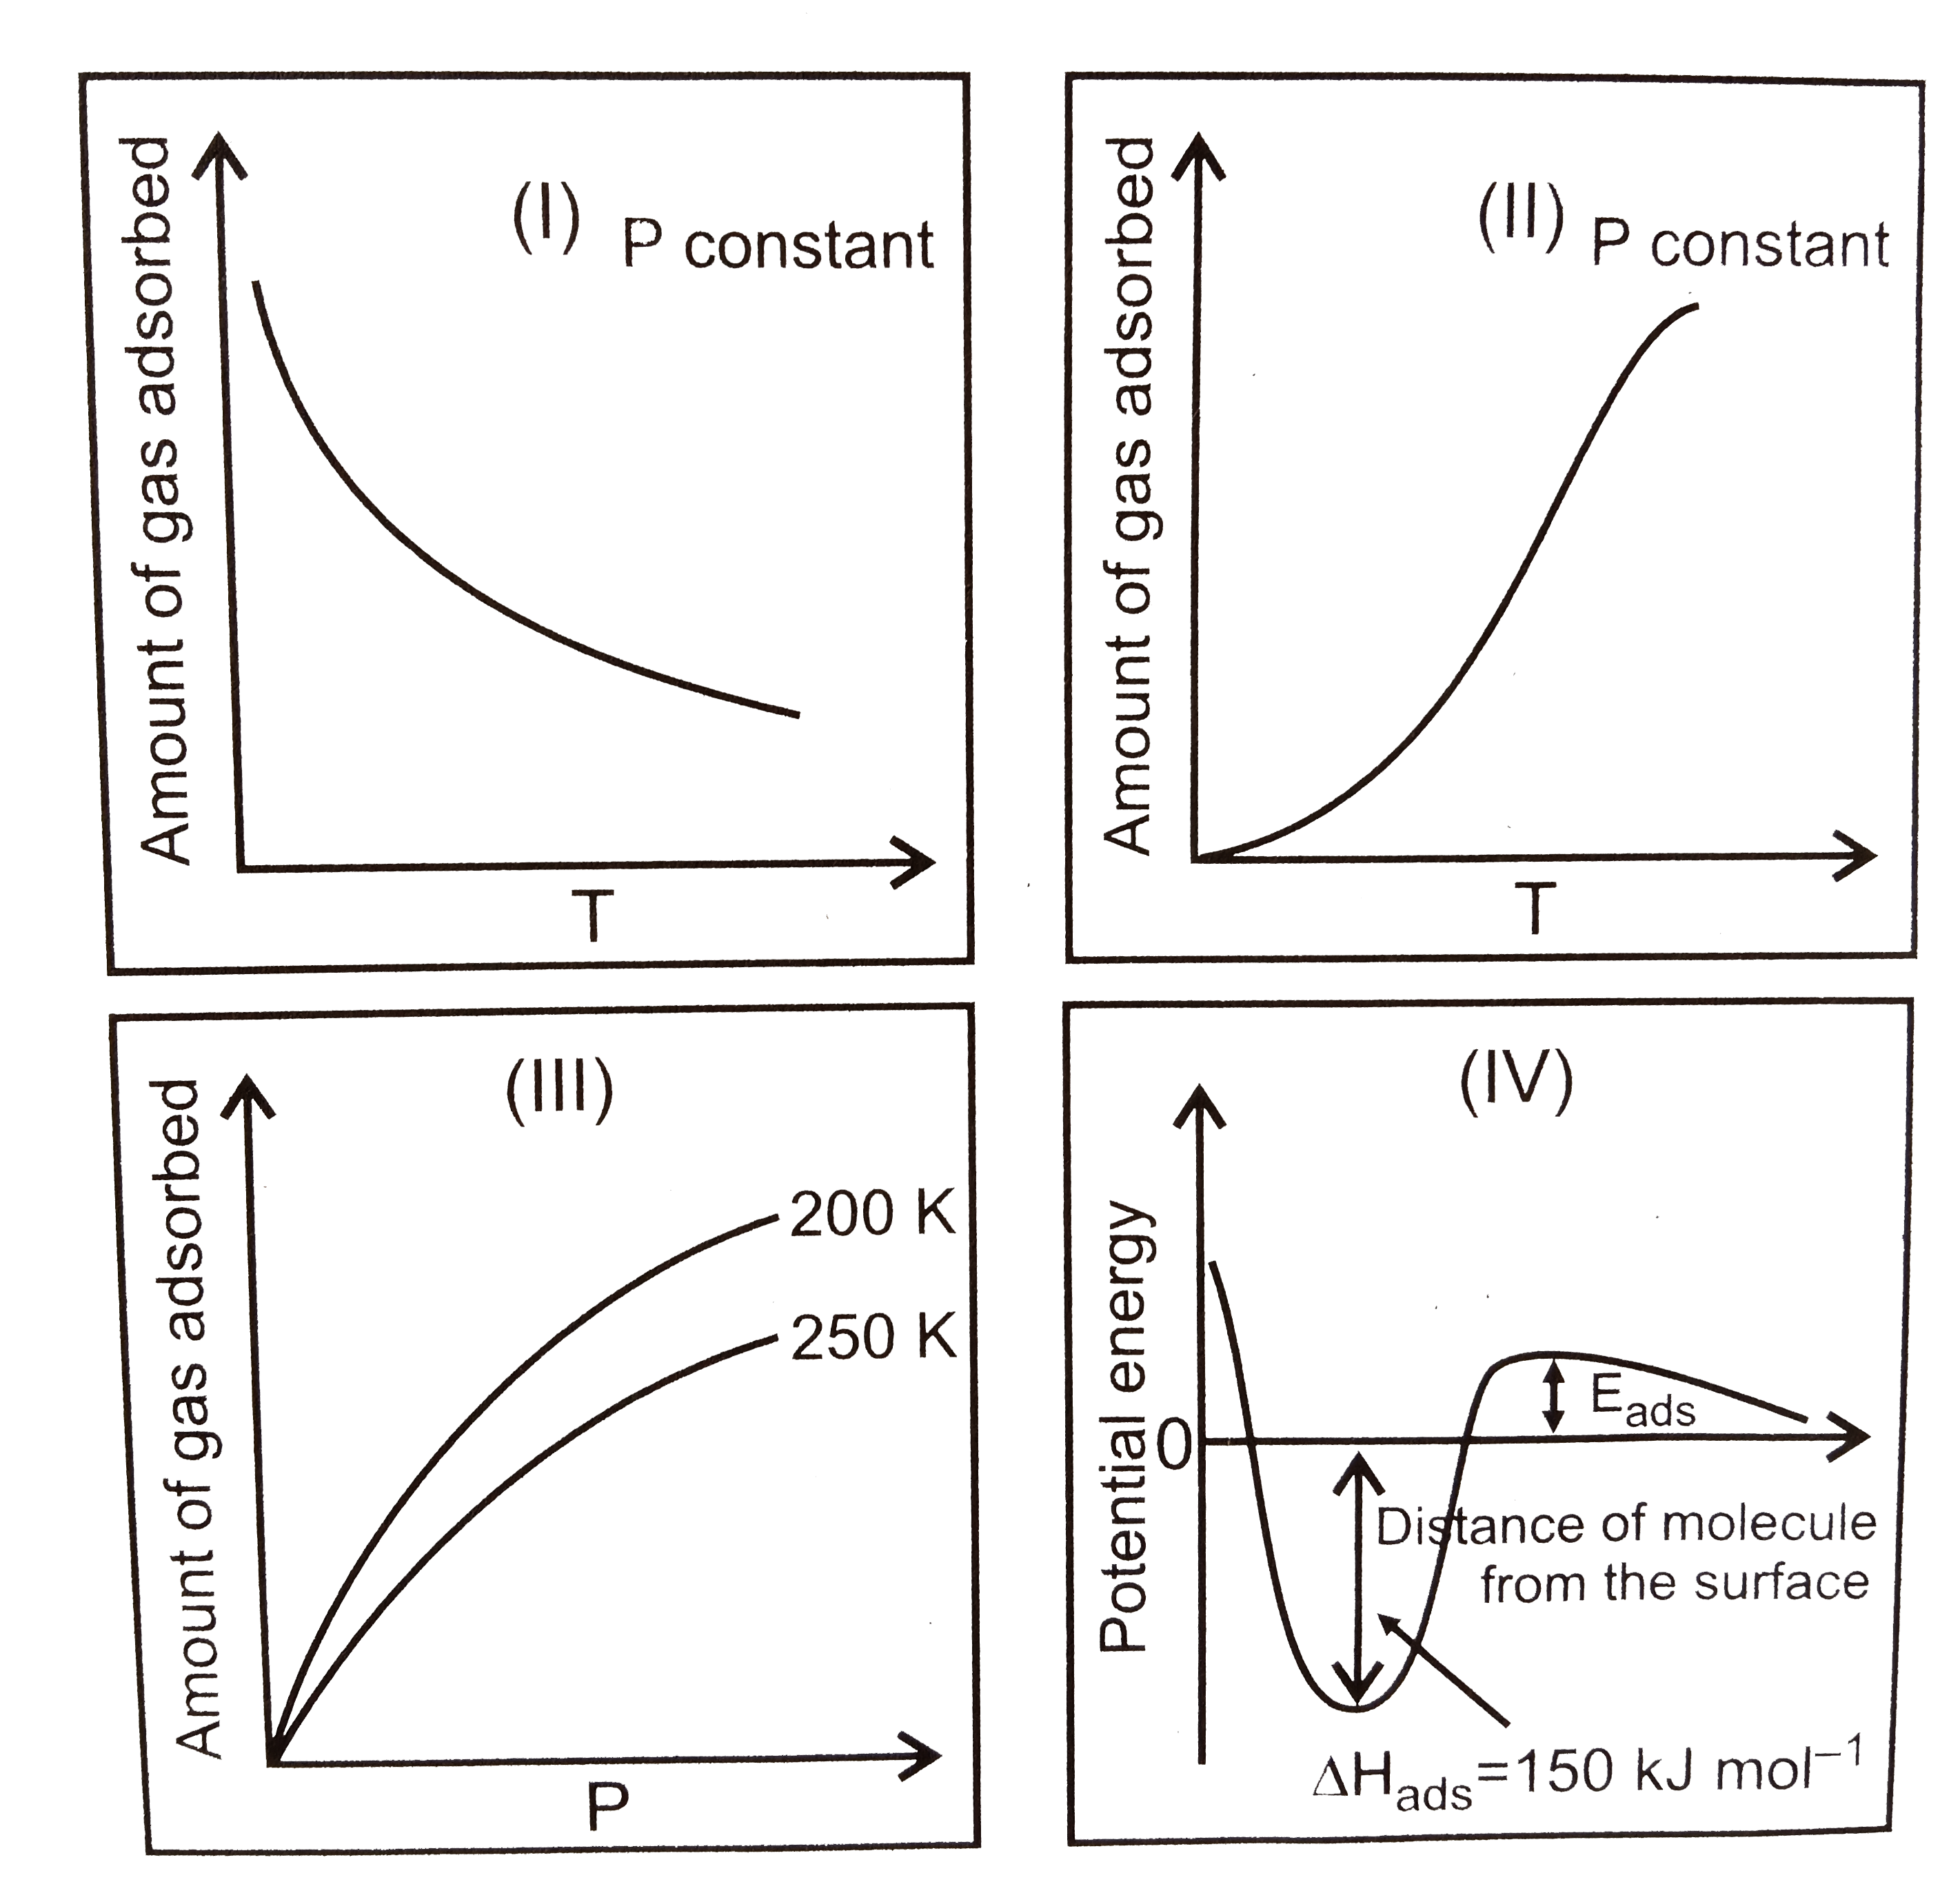 The given graphs//data  I, II, II and  IV pepresent general terends obseved of diffent physiorpton and chemisorption processes under mild conditions of temperature and pressure , which of the following choice (s) about I,II,II  an IV is (are) correcty ?   .